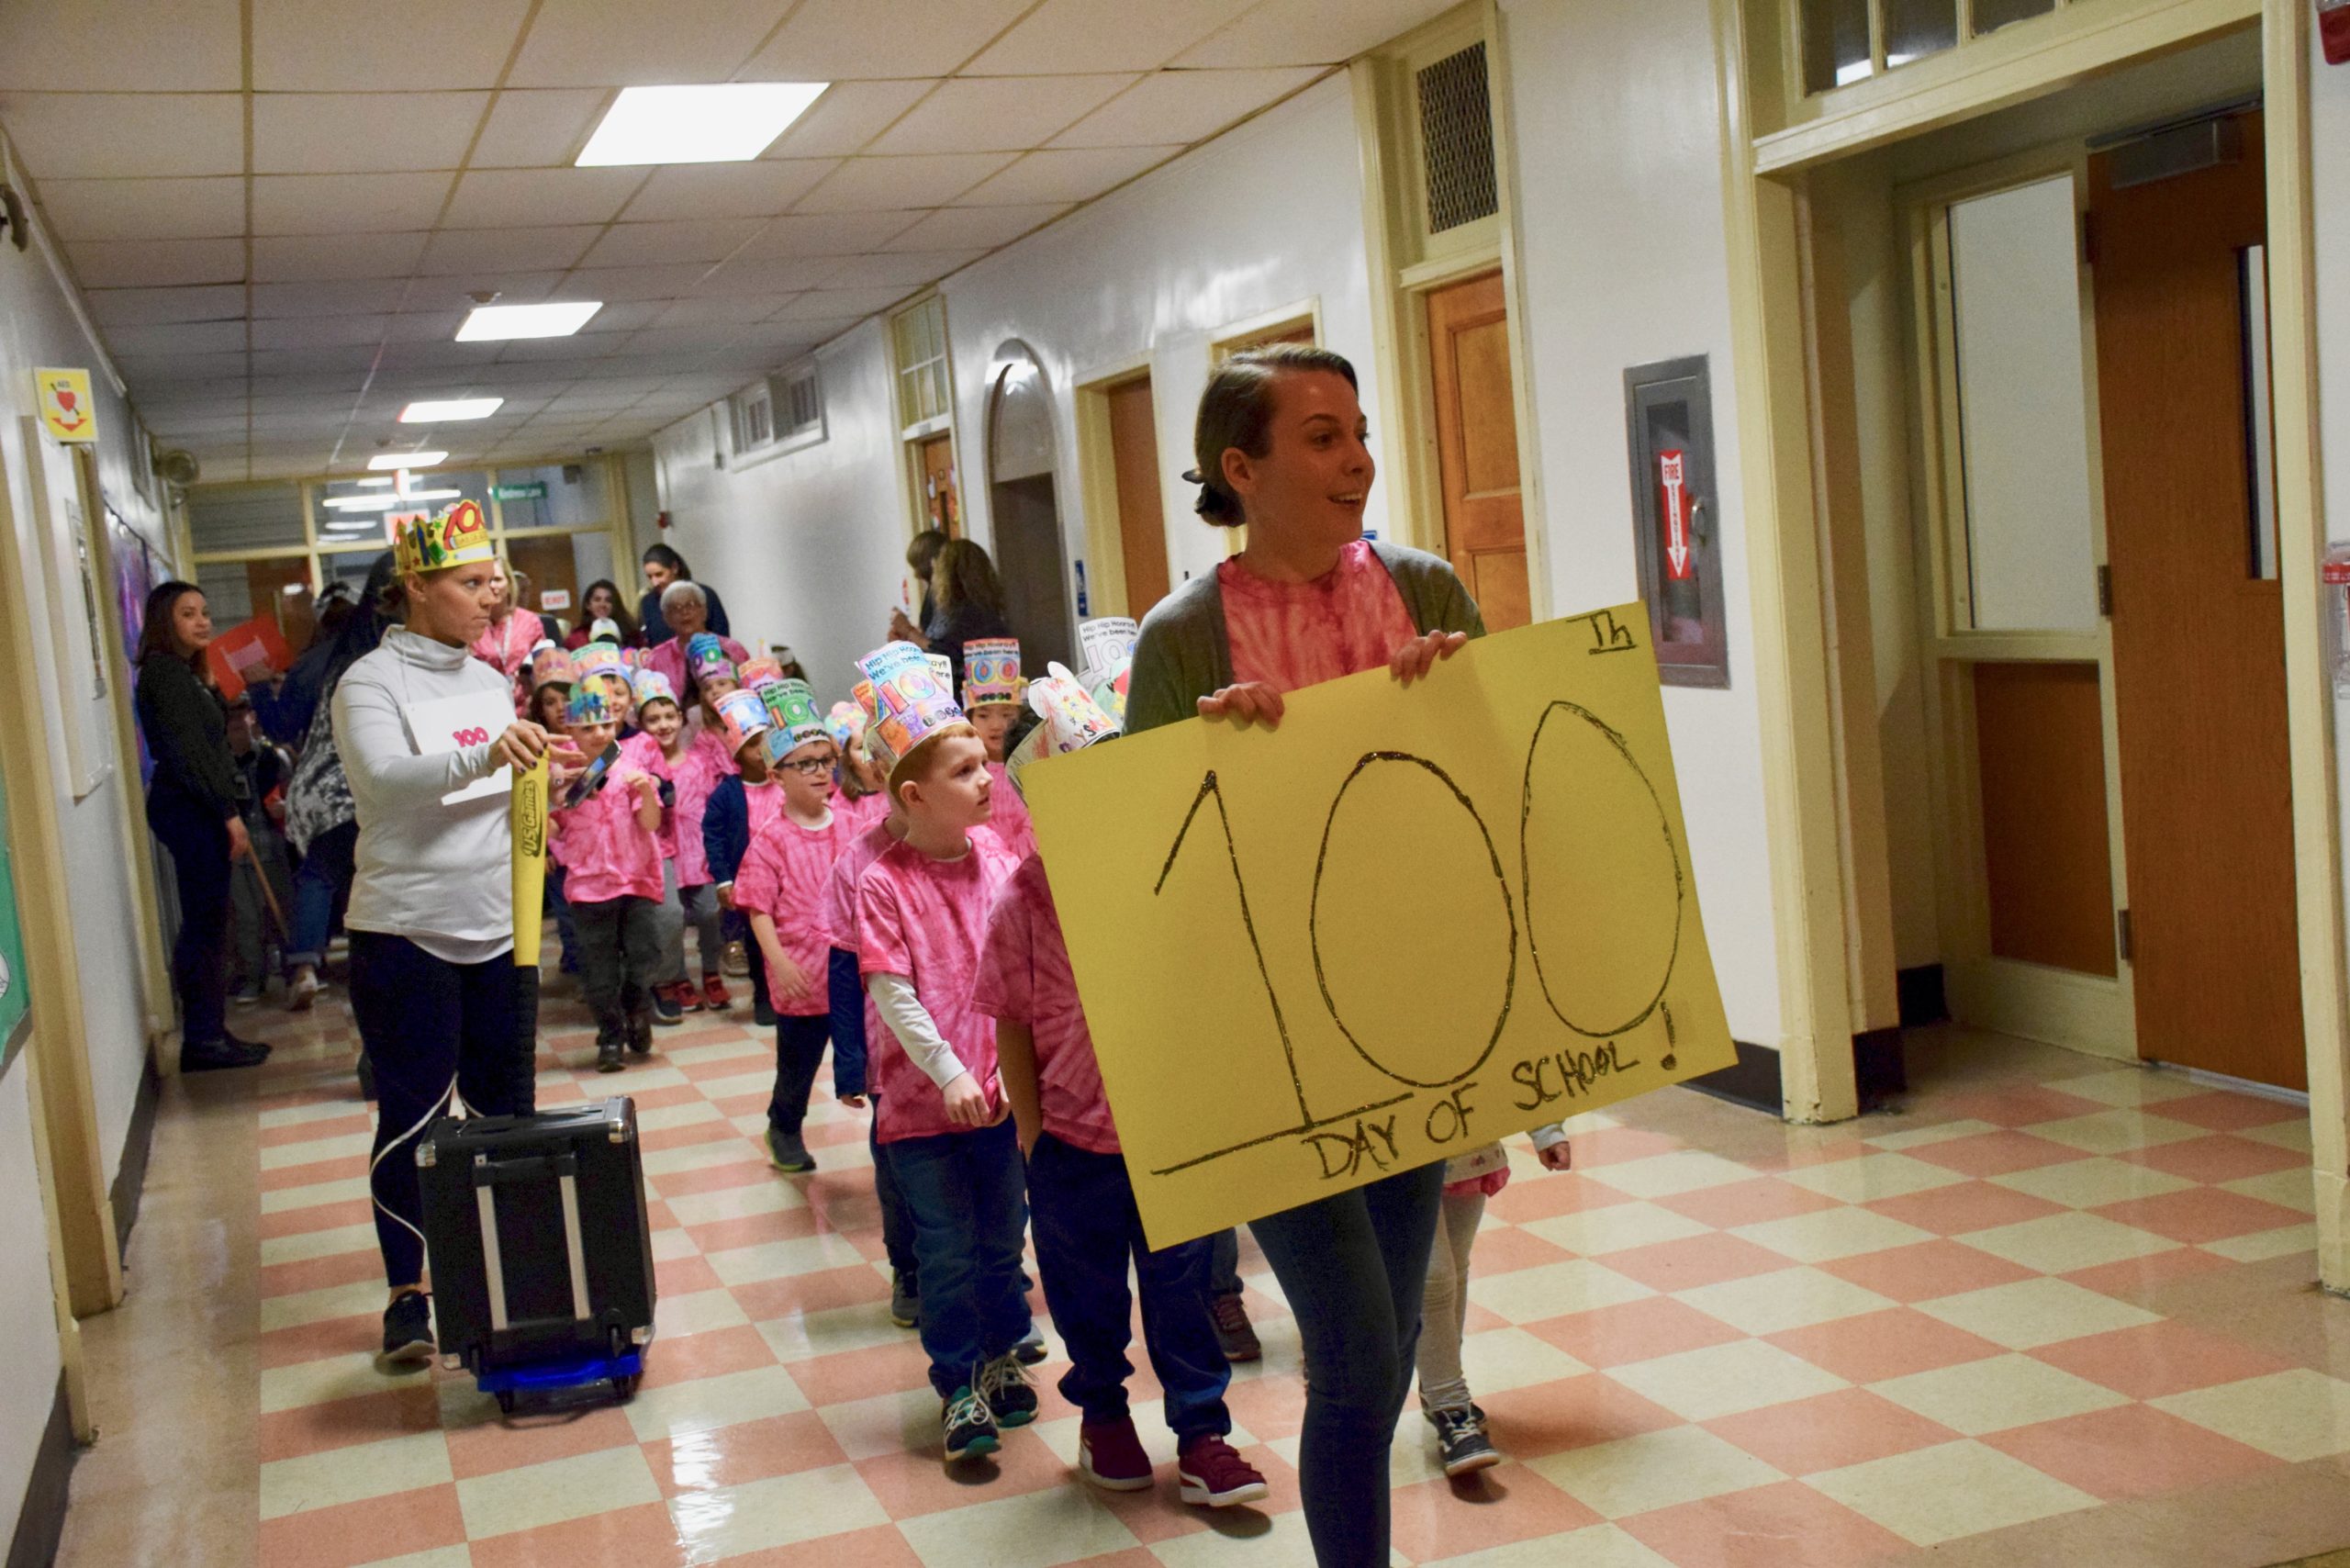 One-hundred days of school at Floral Park-Bellerose - The Island Now